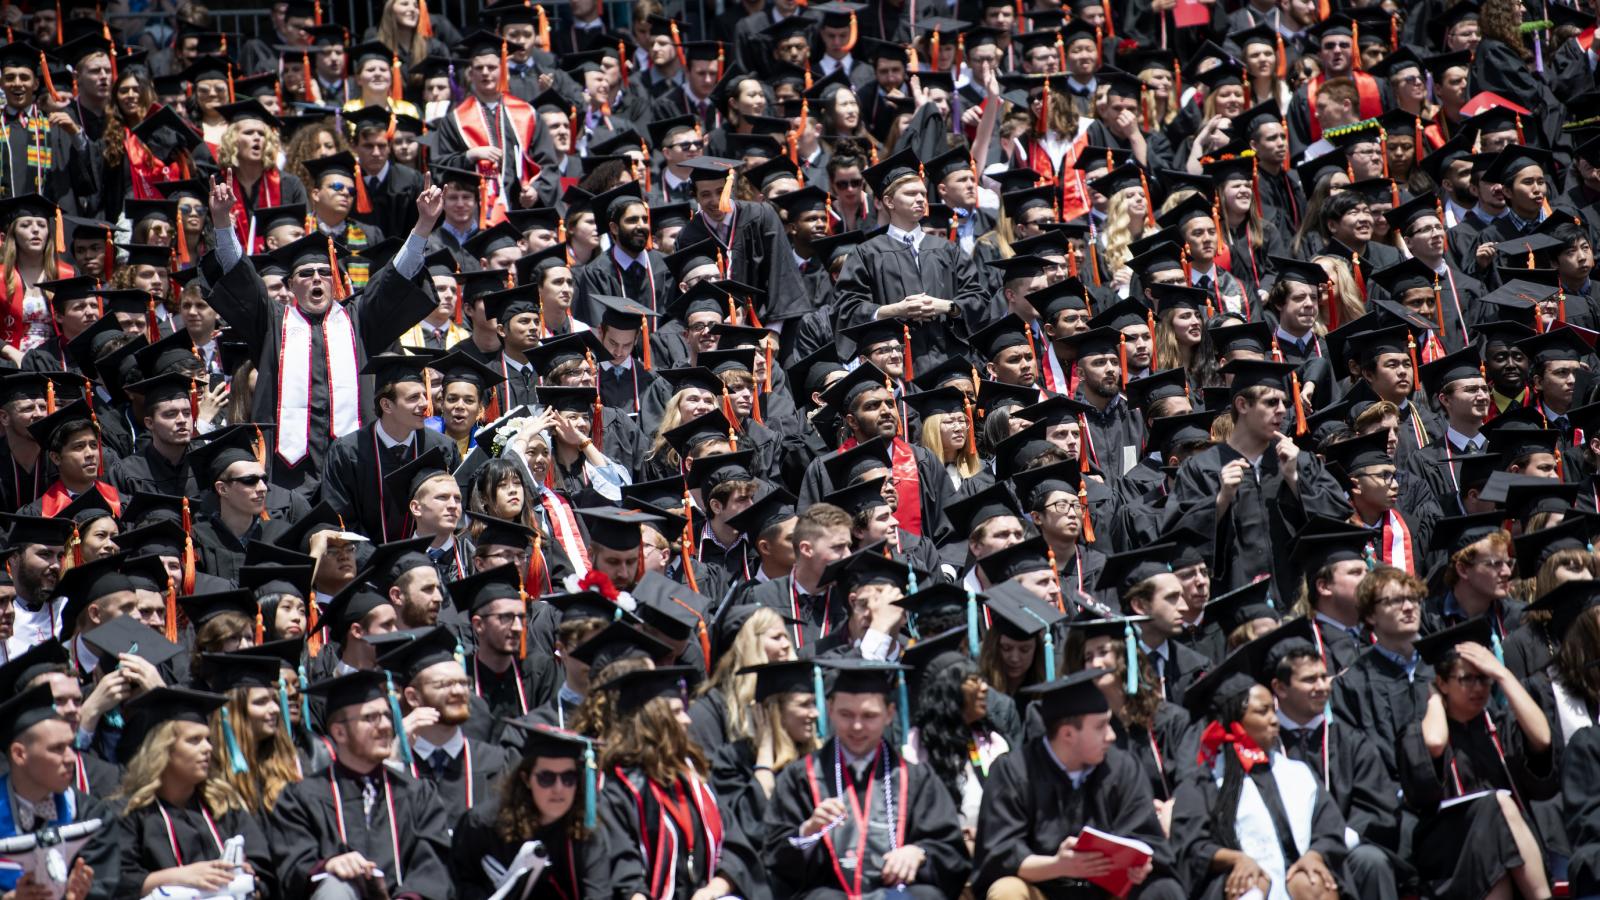 Spring 2019 Commencement - May 5, 2019